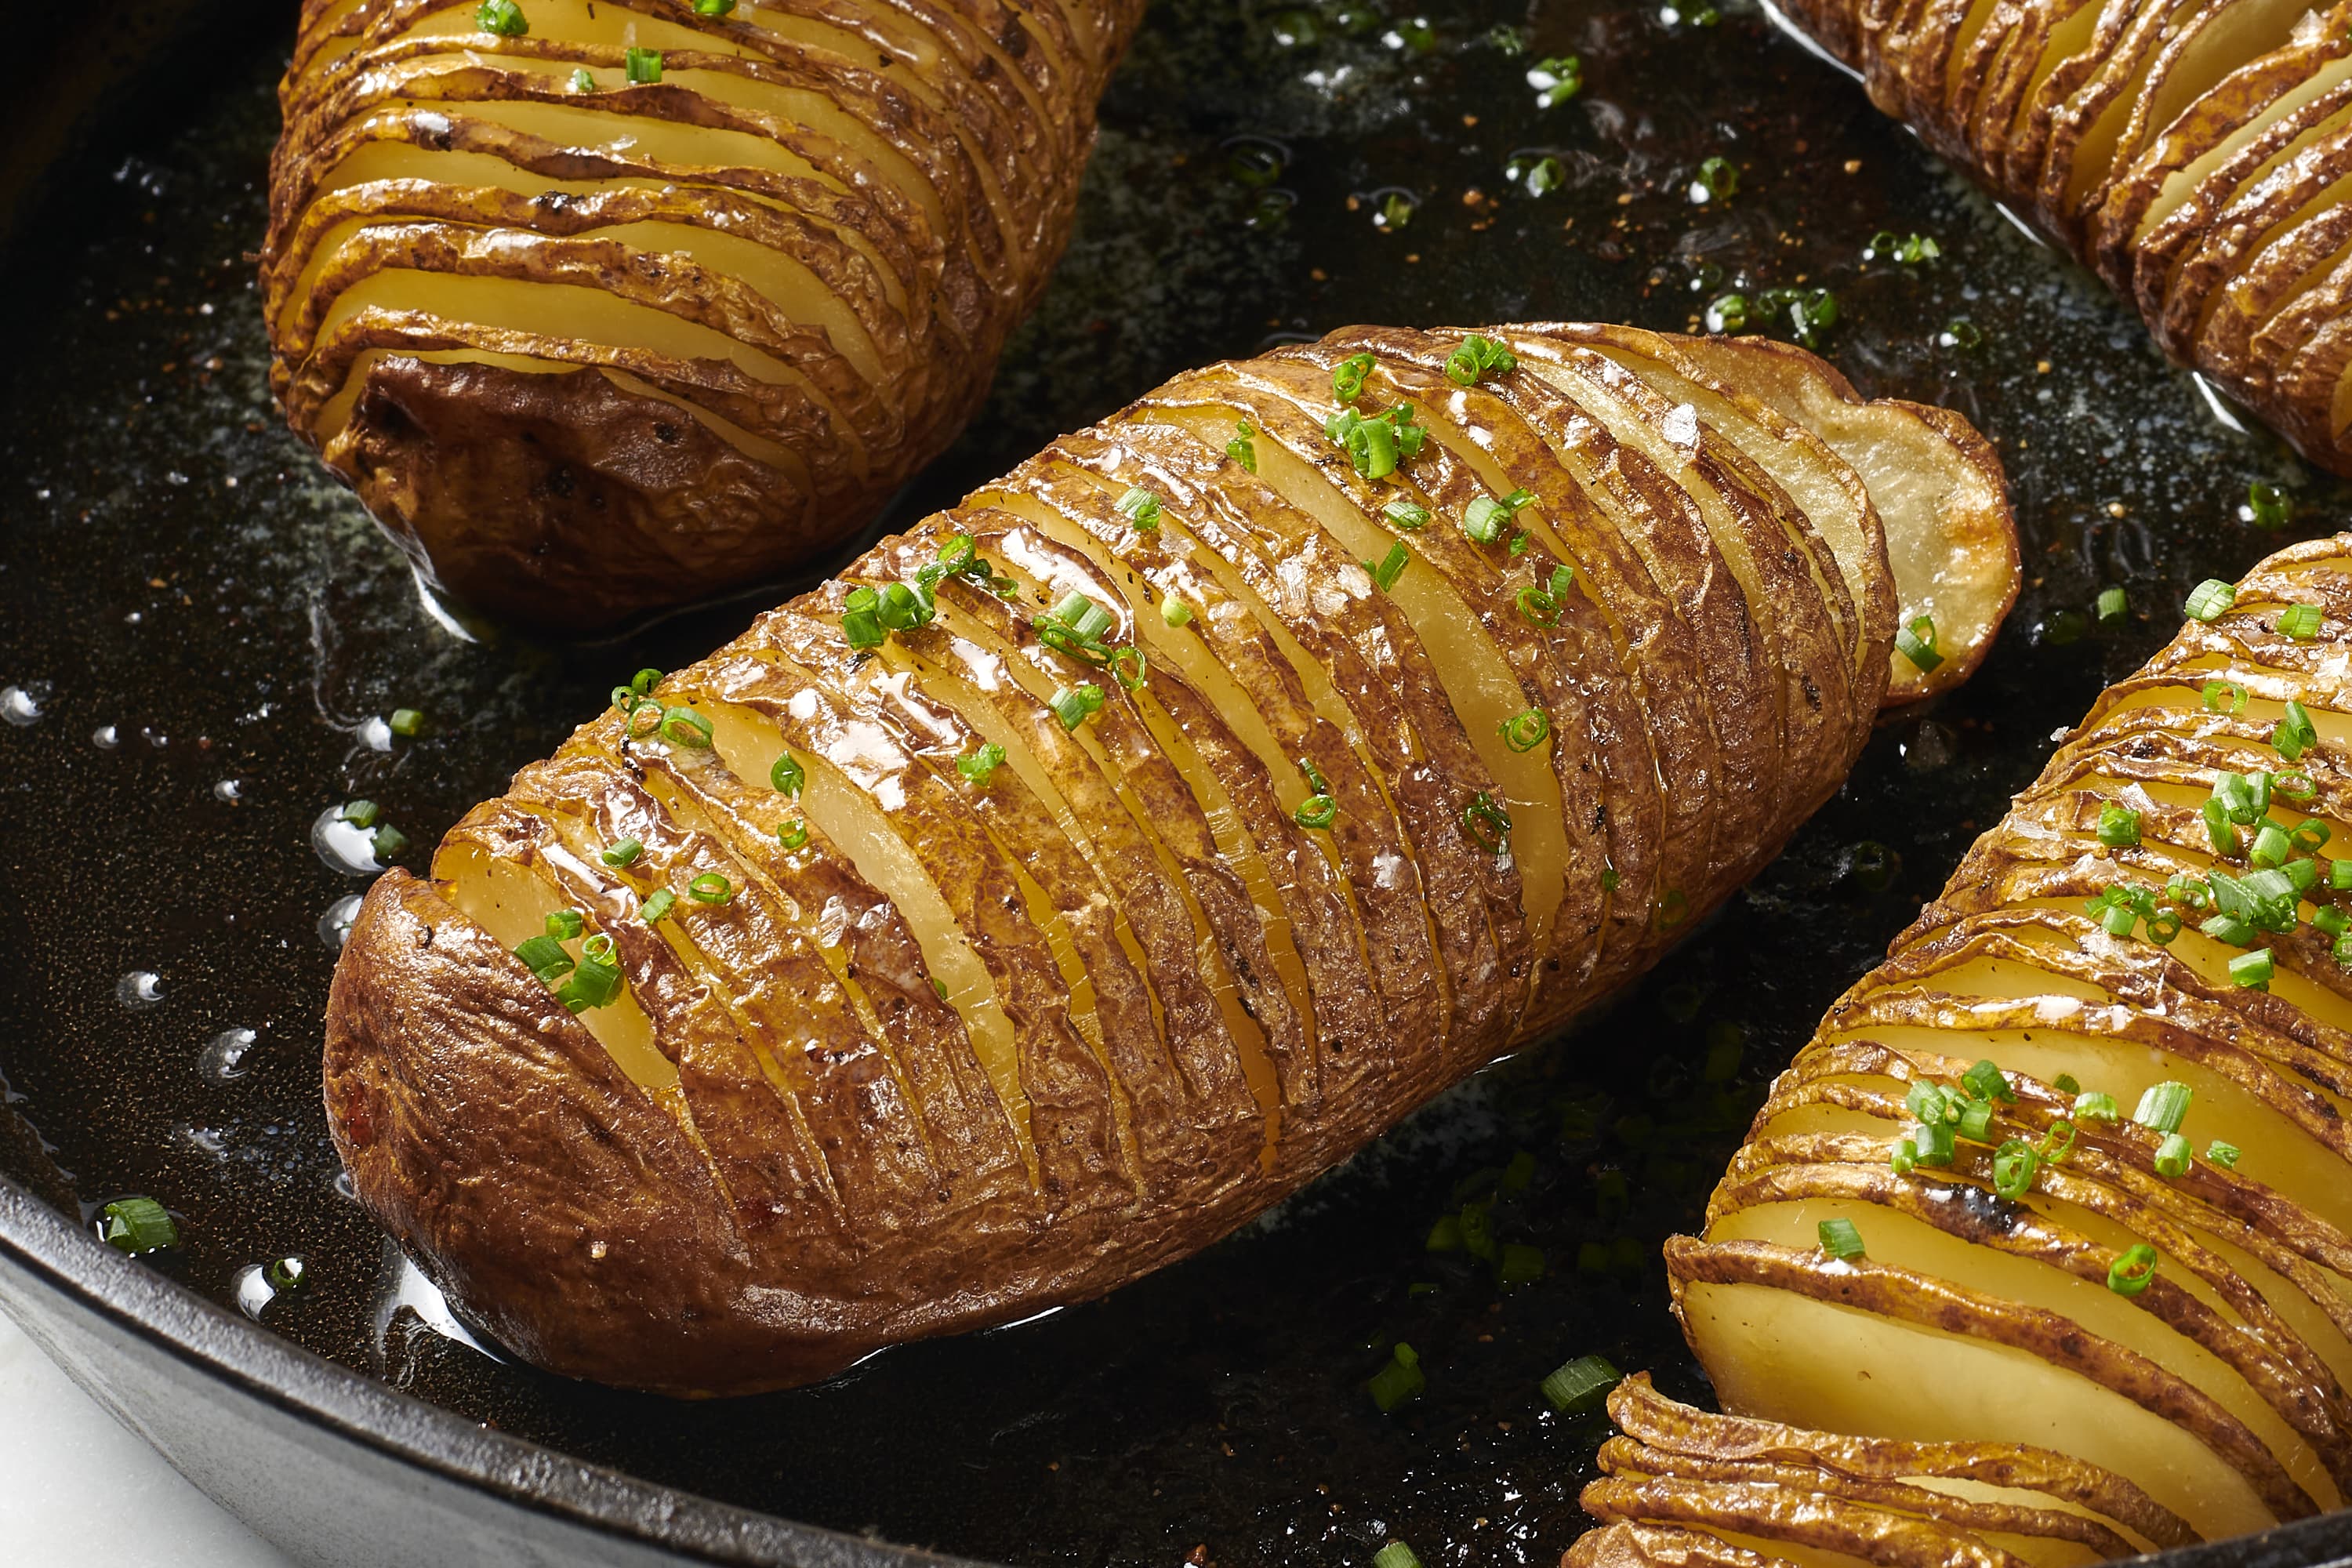 https://cdn.apartmenttherapy.info/image/upload/v1692634196/k/08-2023-how-to-make-hasselback-potatoes/how-to-make-hasselback-potatoes-894-horizontal.jpg